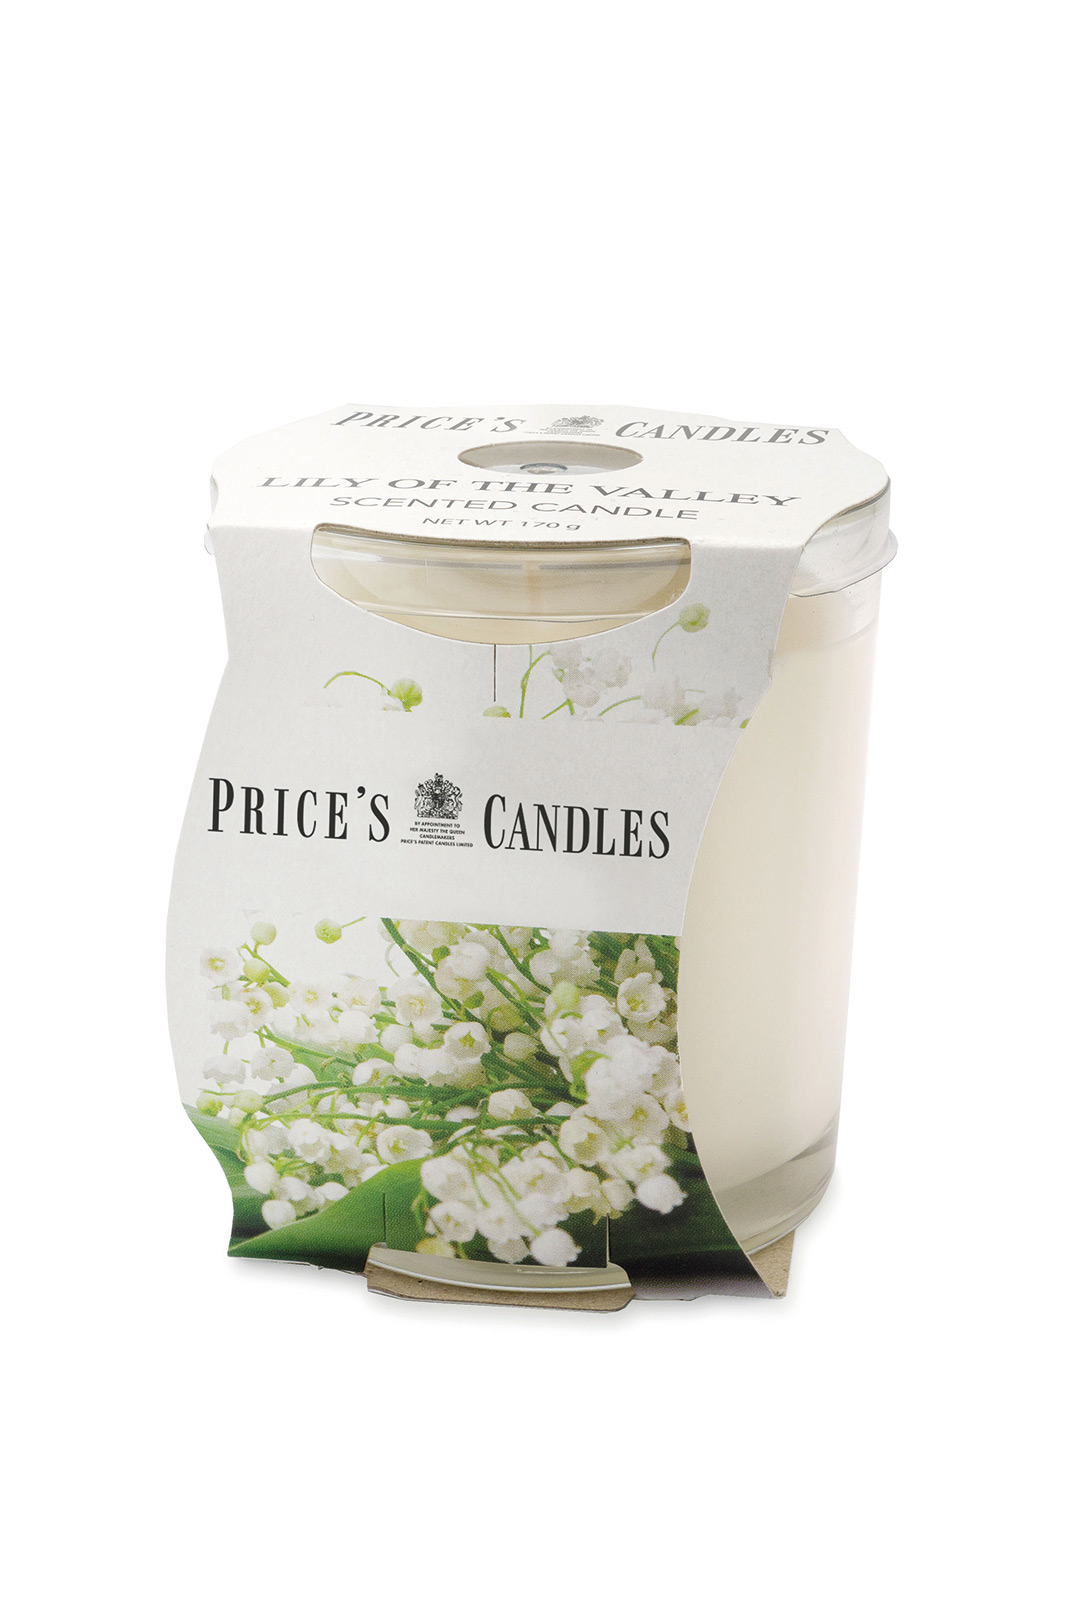 Prices Candle "Lily of the Valley" 170g      